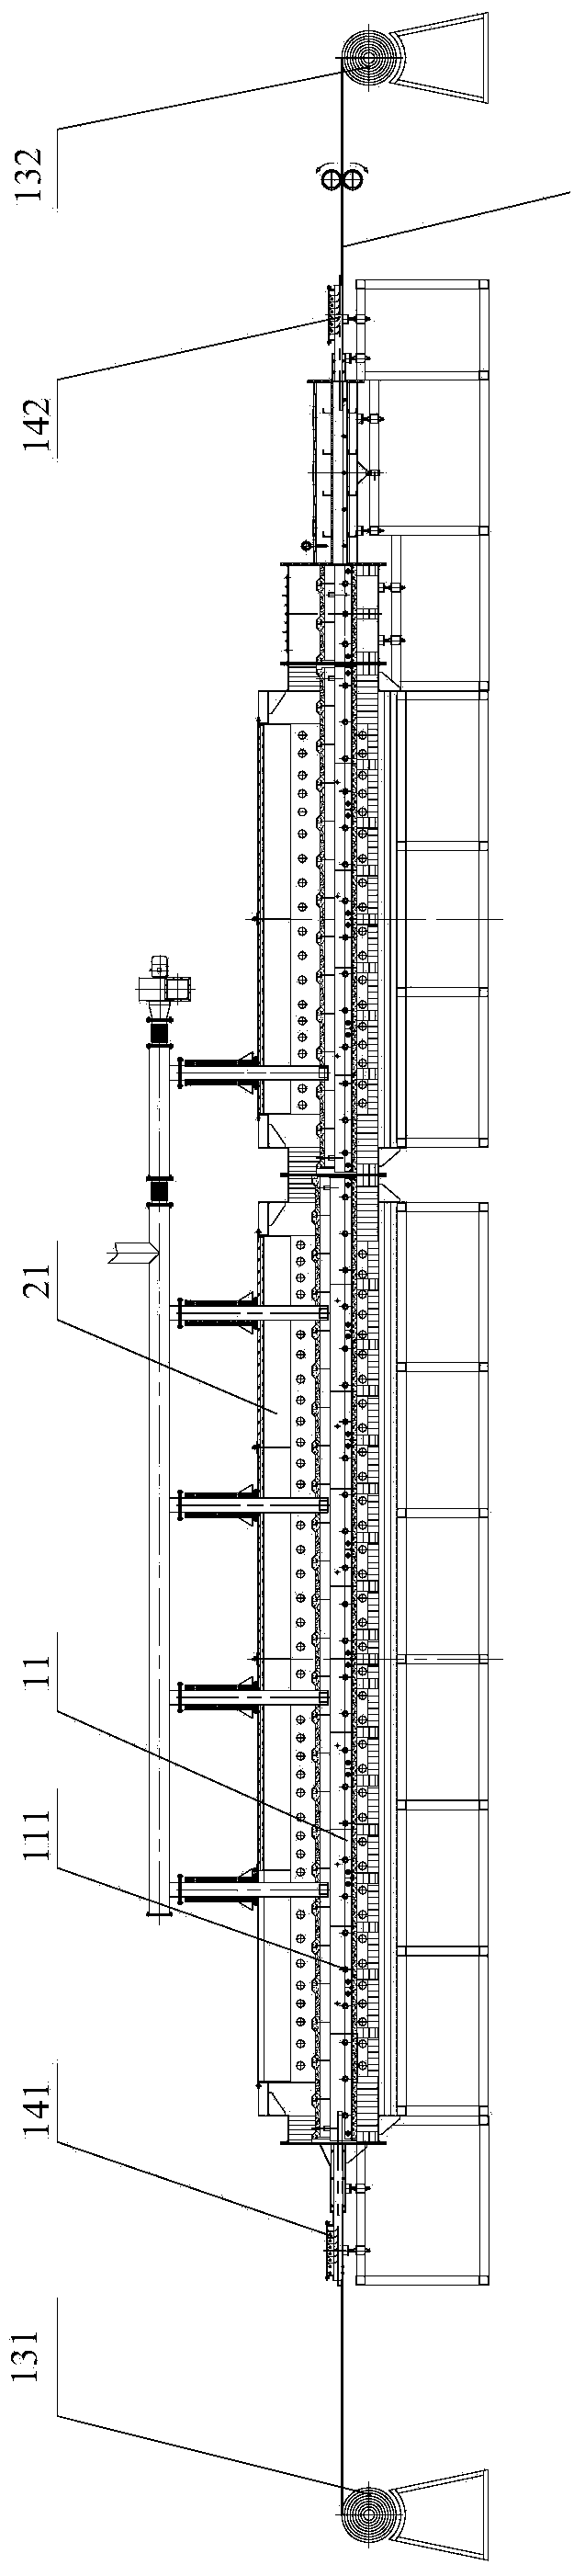 Continuous carbonization equipment and material conveying device